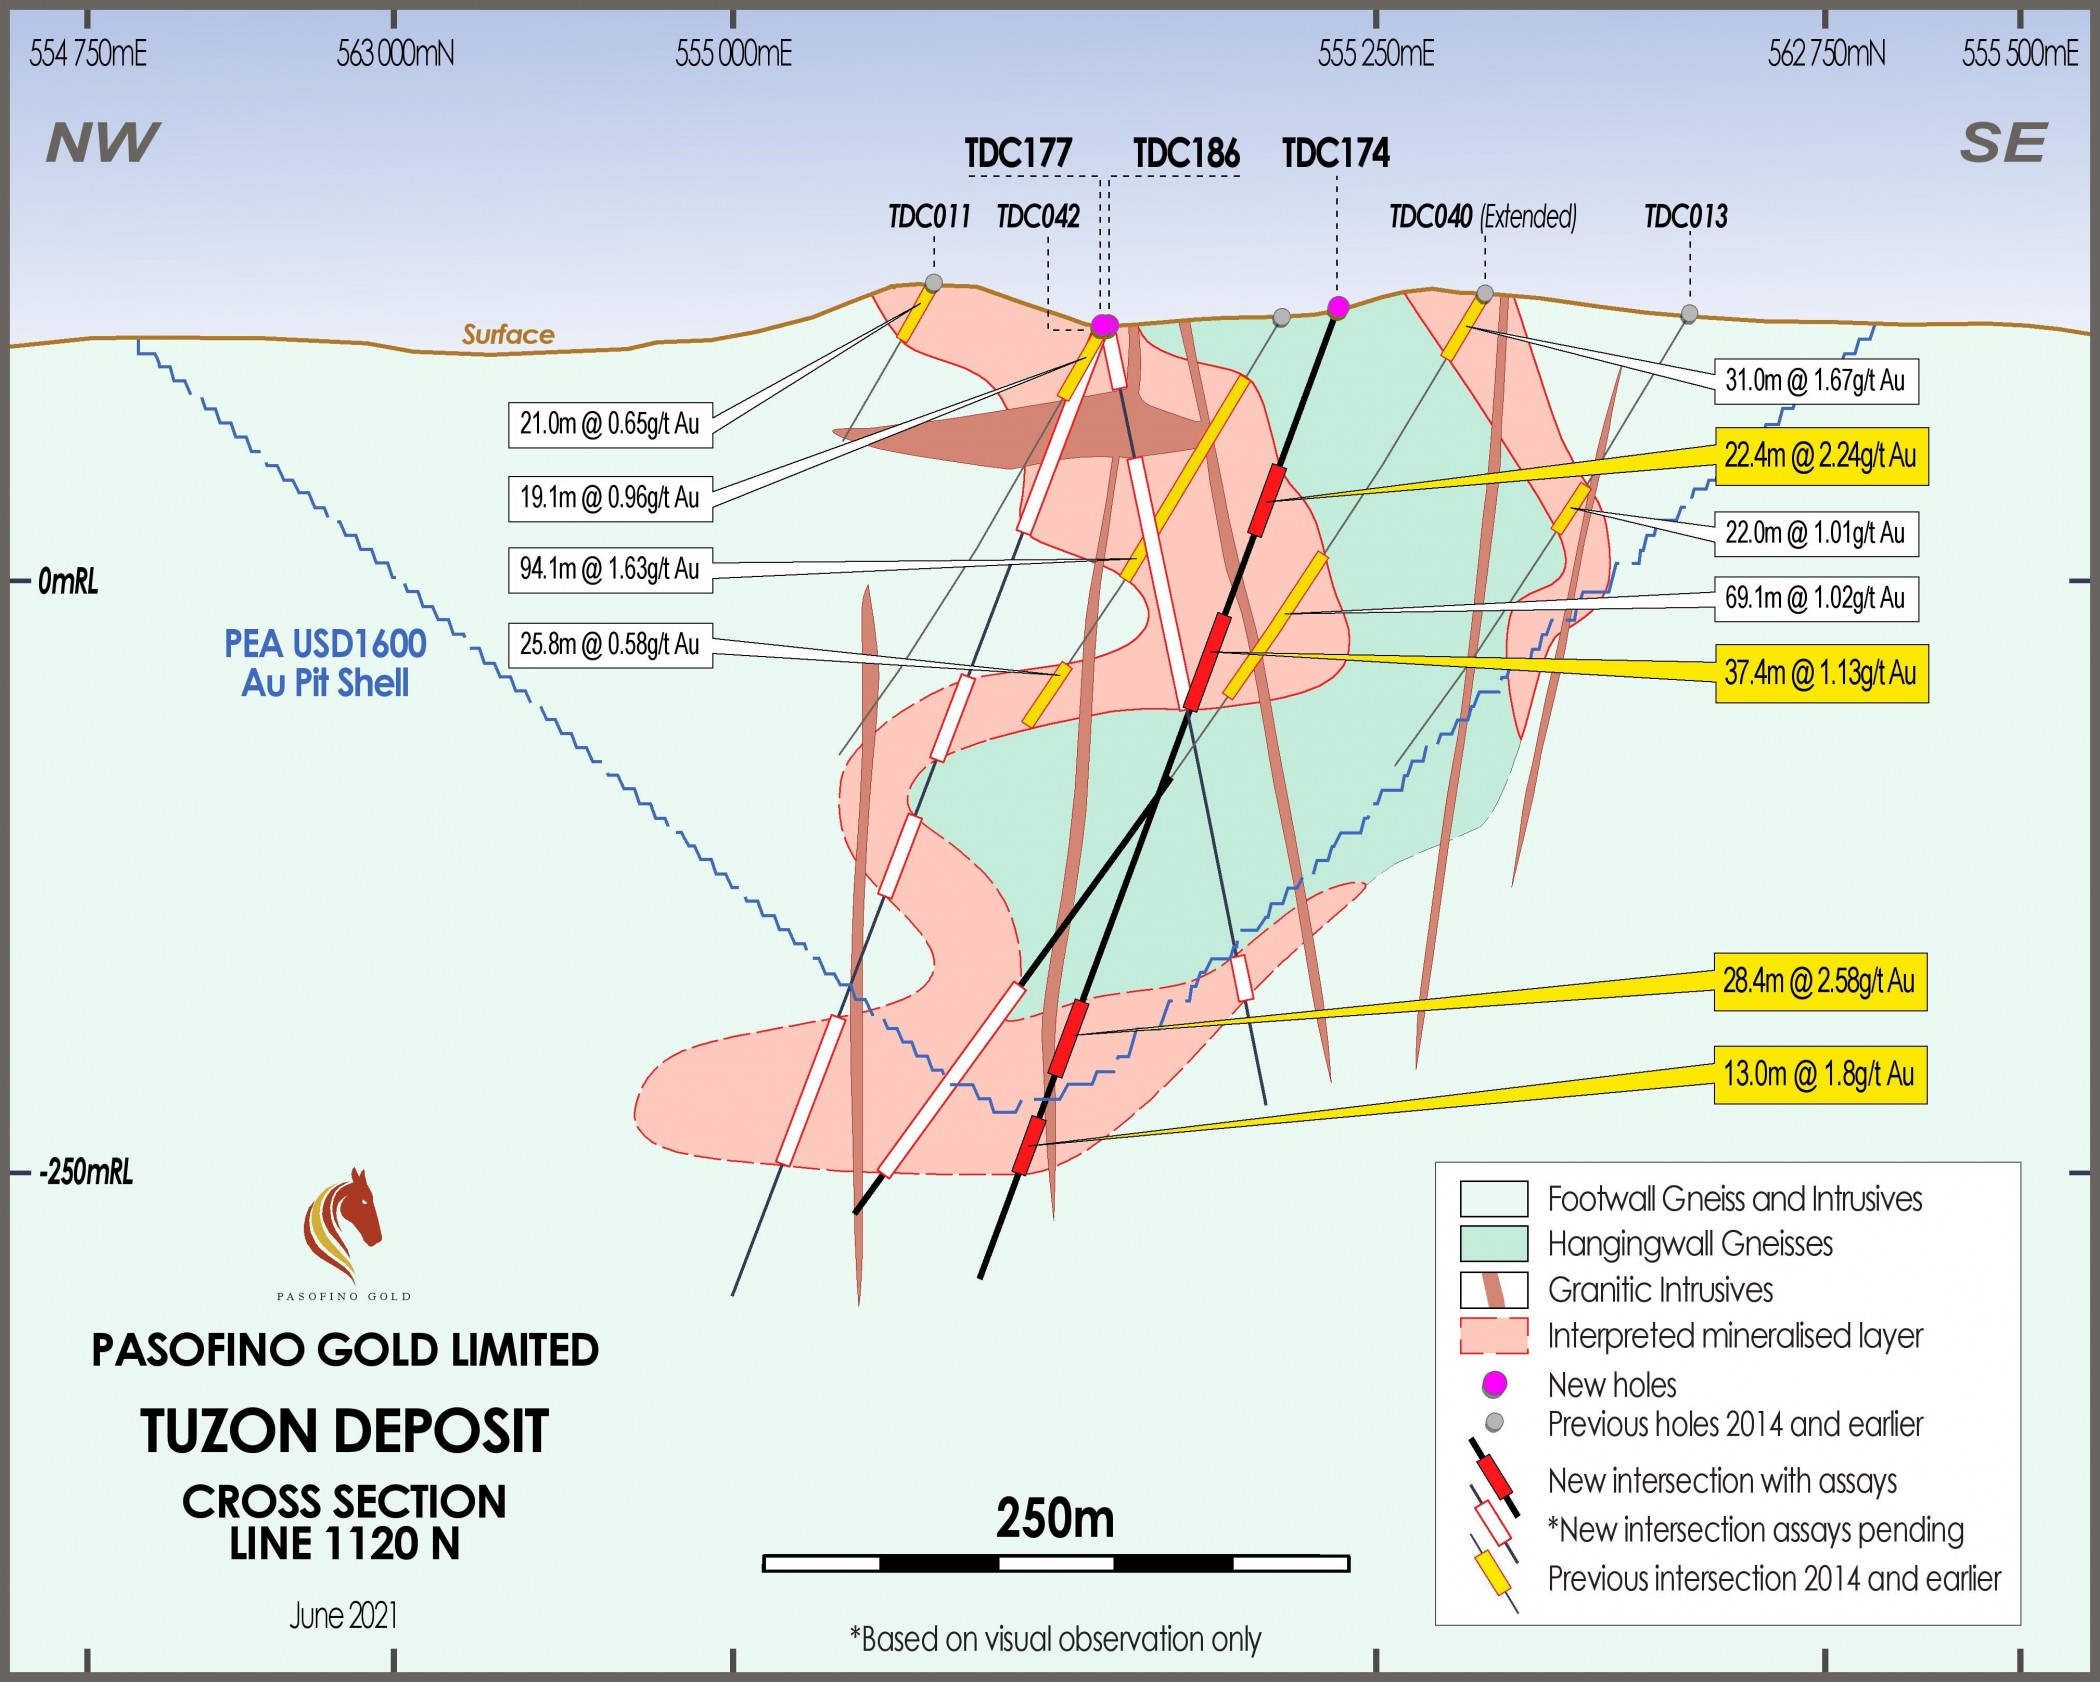 Pasofino Gold Announces Results of Its First Four New Holes at Tuzon